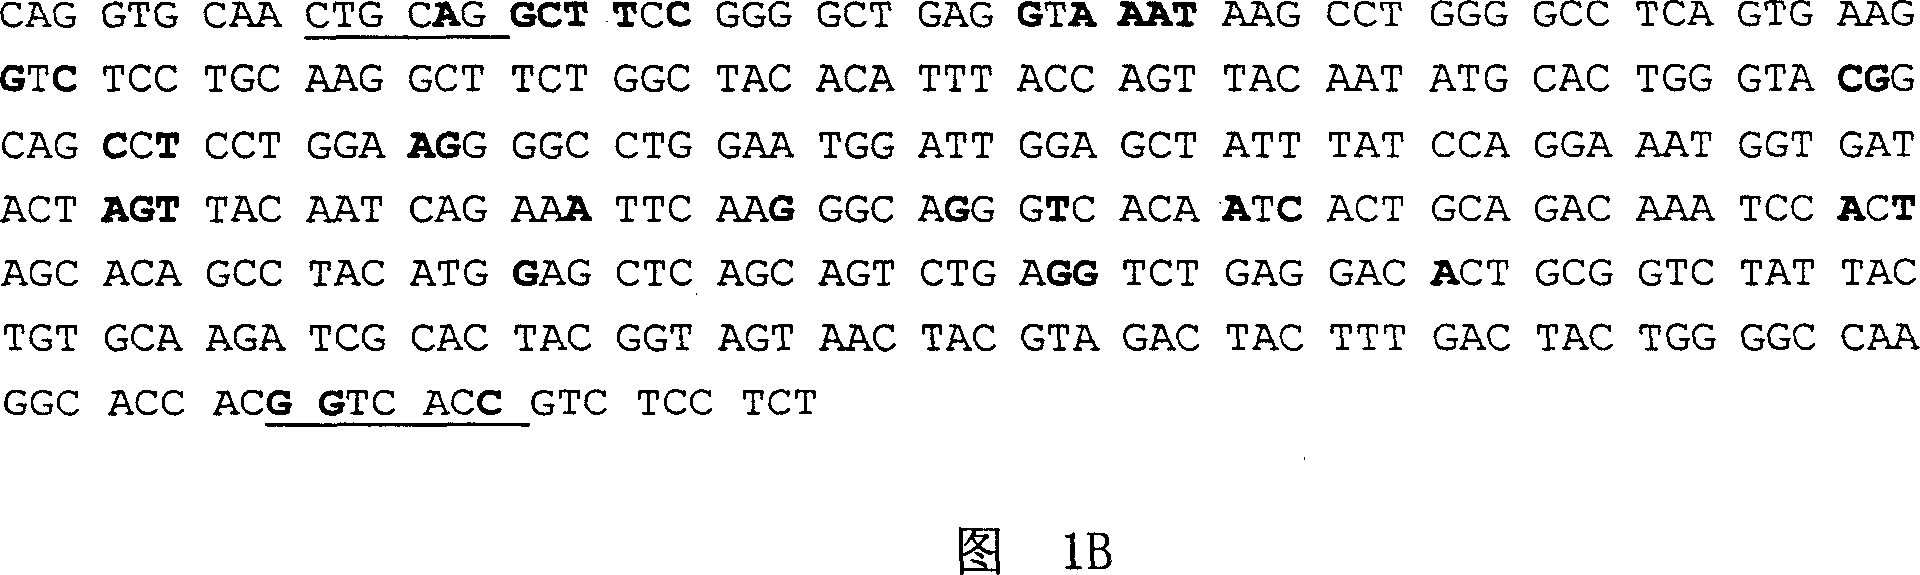 Antibody of anti human CD20 from human resources functionally, and application